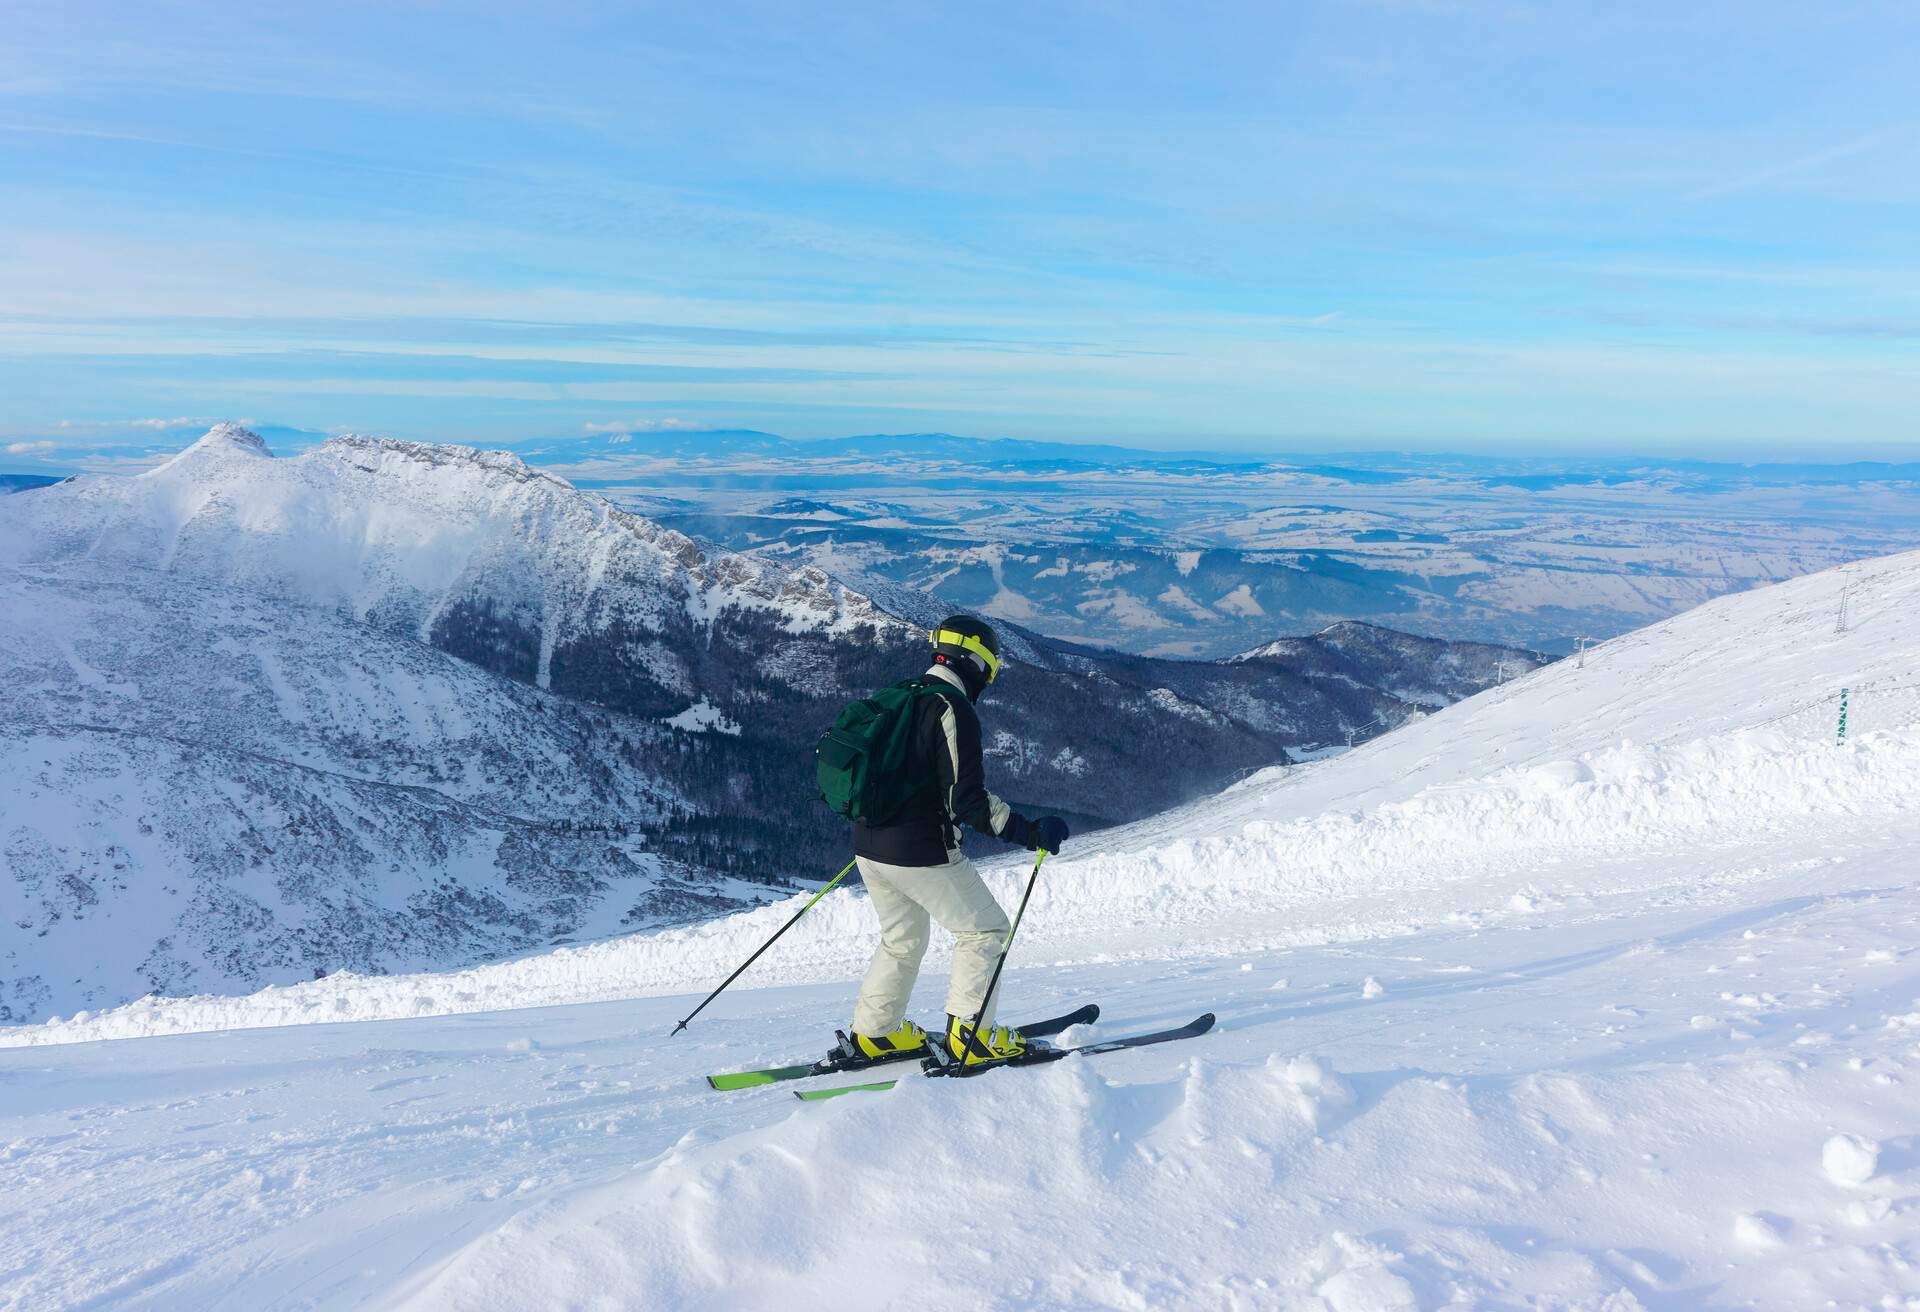 A person skiing down a snowy slope while gazing at the snowy mountains.